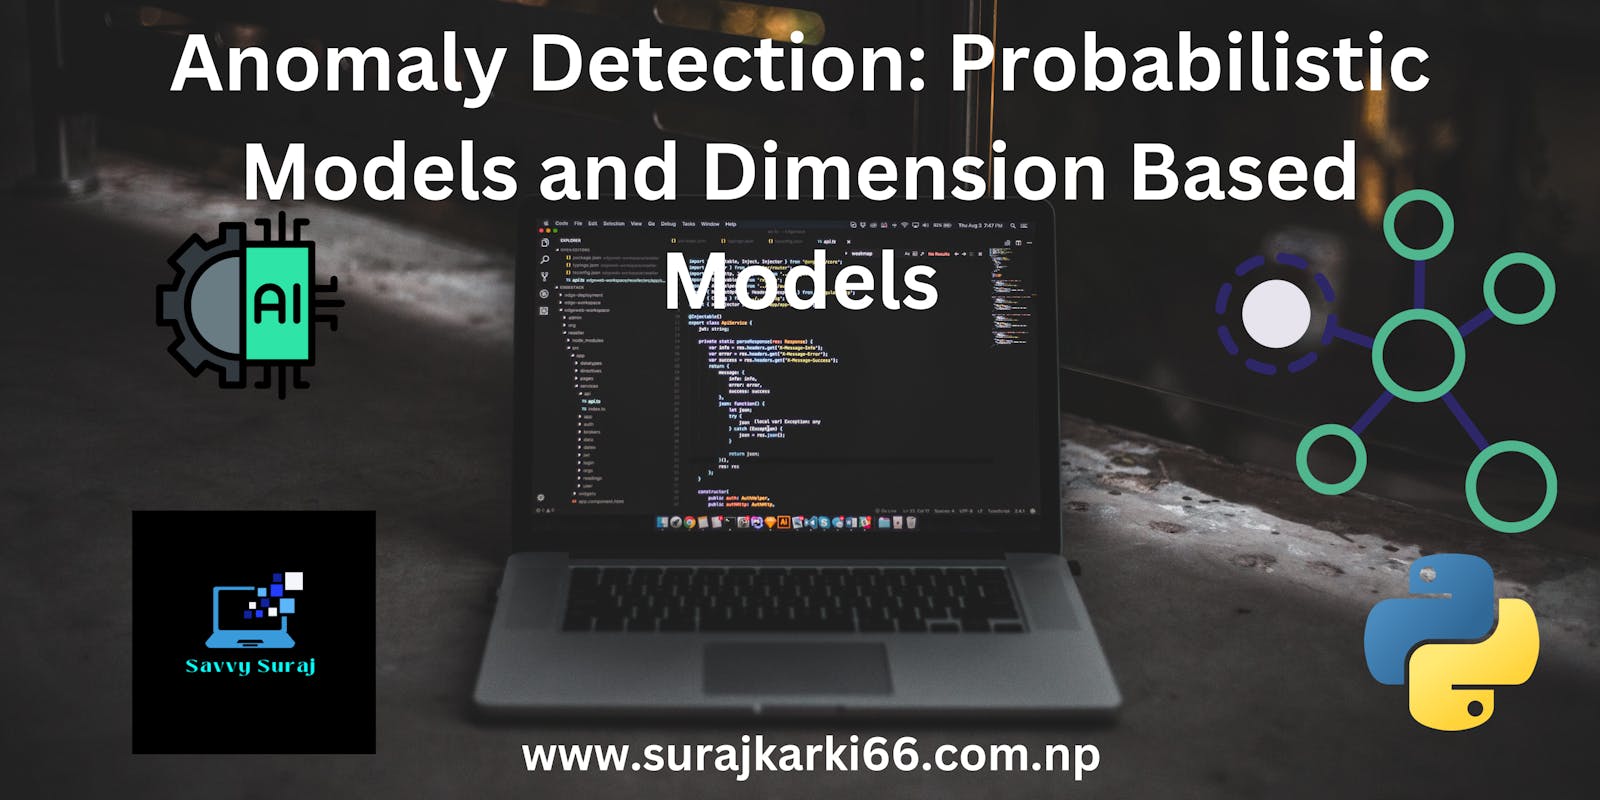 Anomaly Detection Using Probabilistic and Dimension-Based Models